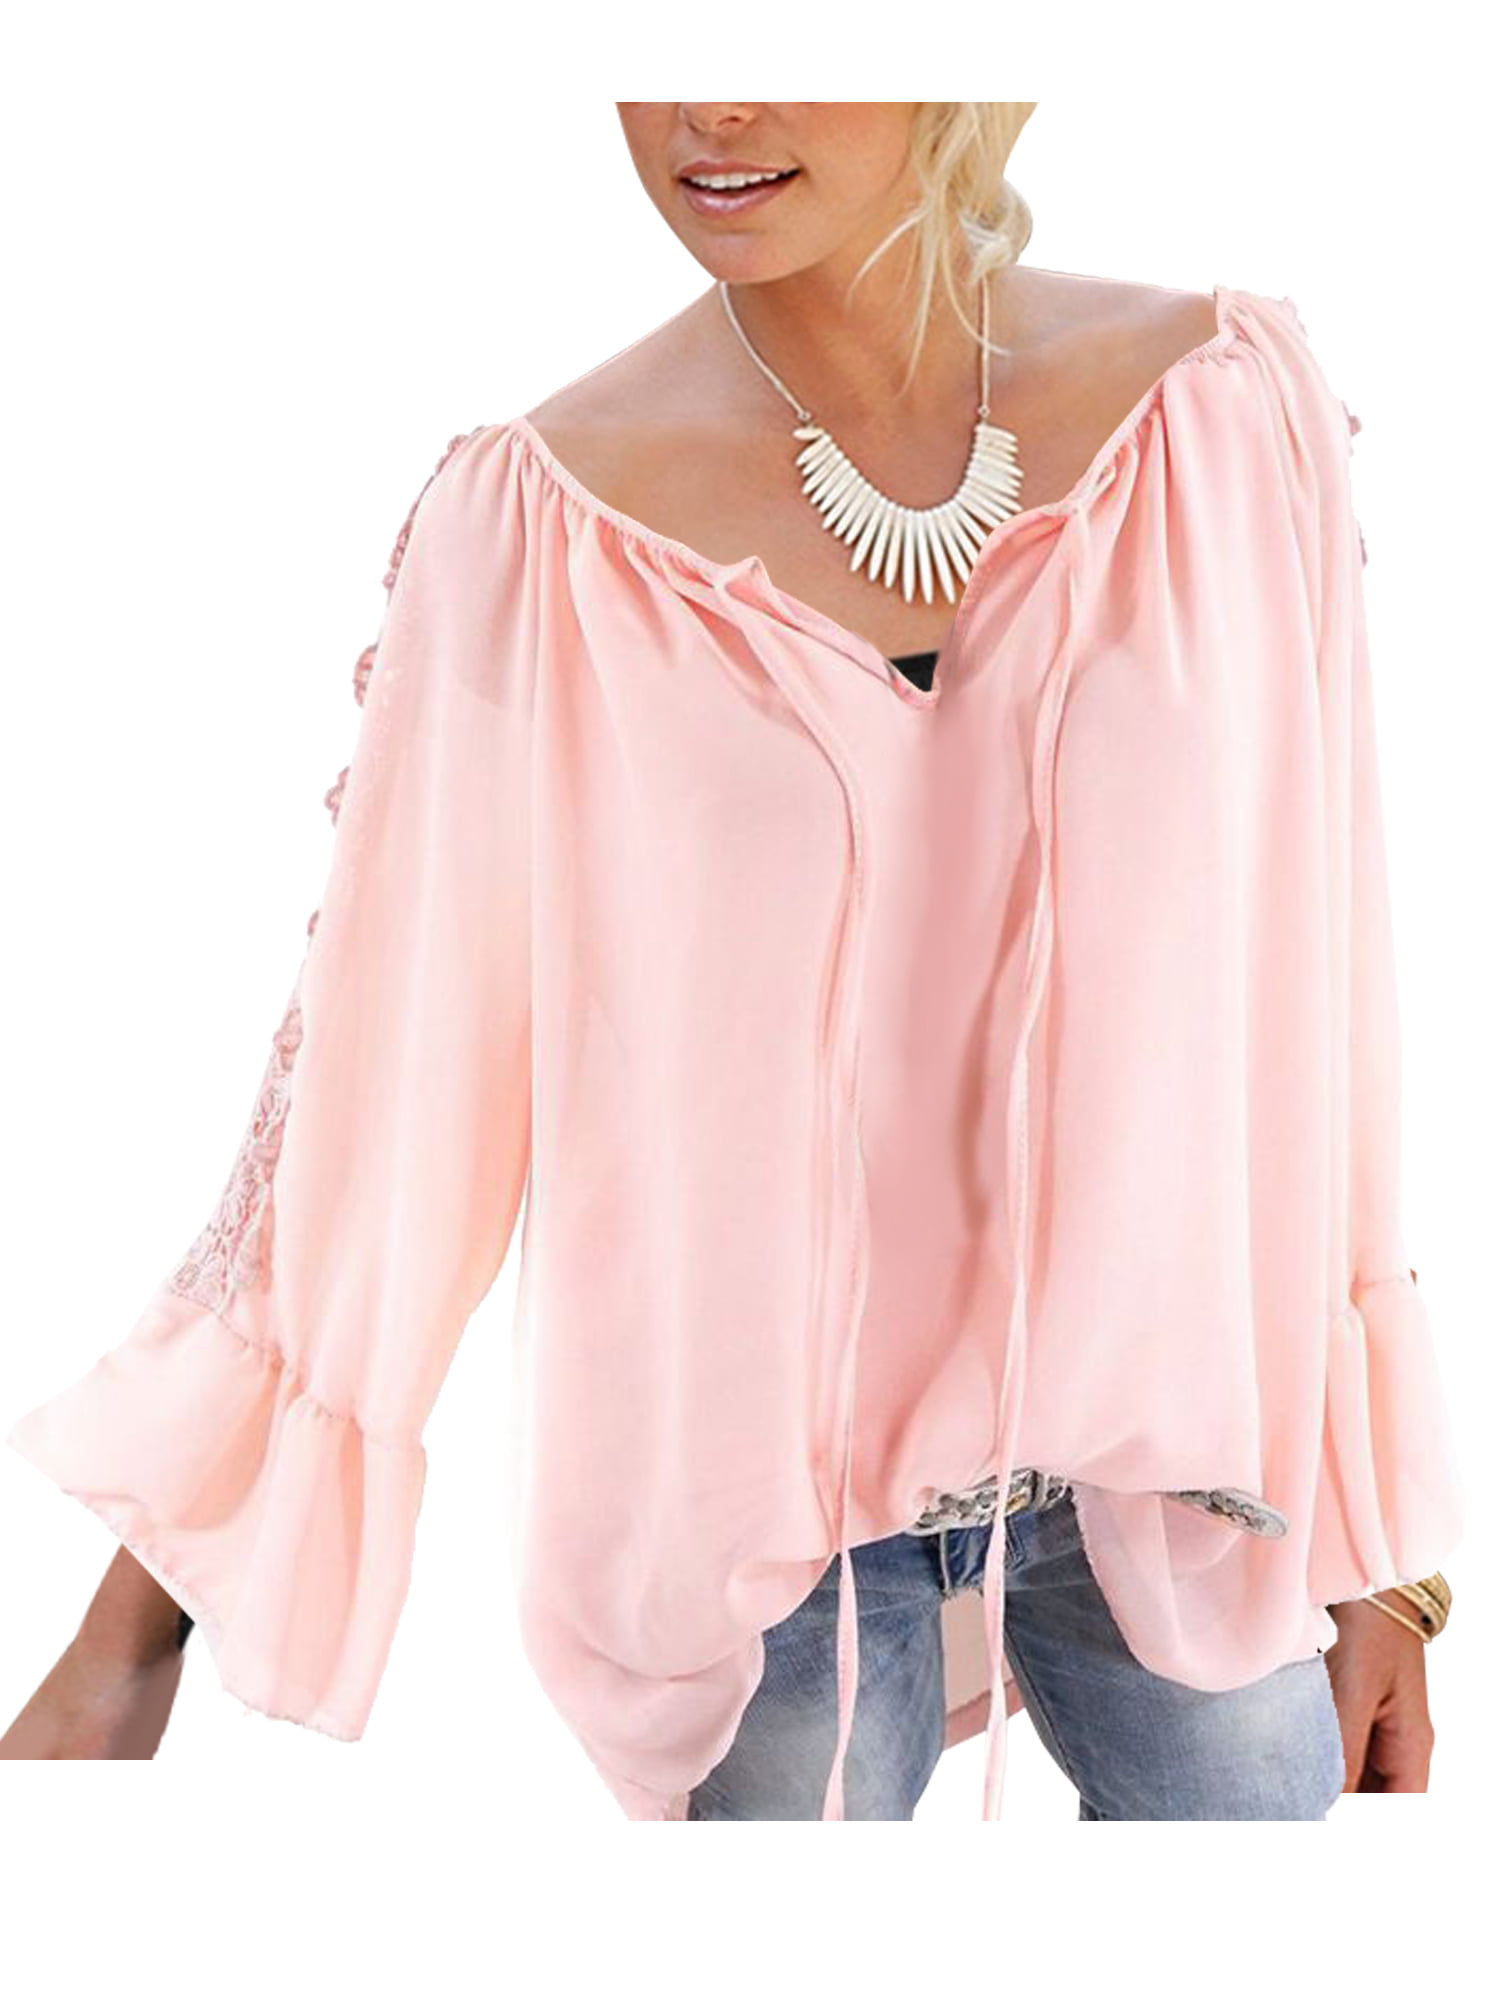 Plus Size Womens Frill V-Neck Tunic Blouse Tops Ladies Baggy Long Sleeve T-Shirt